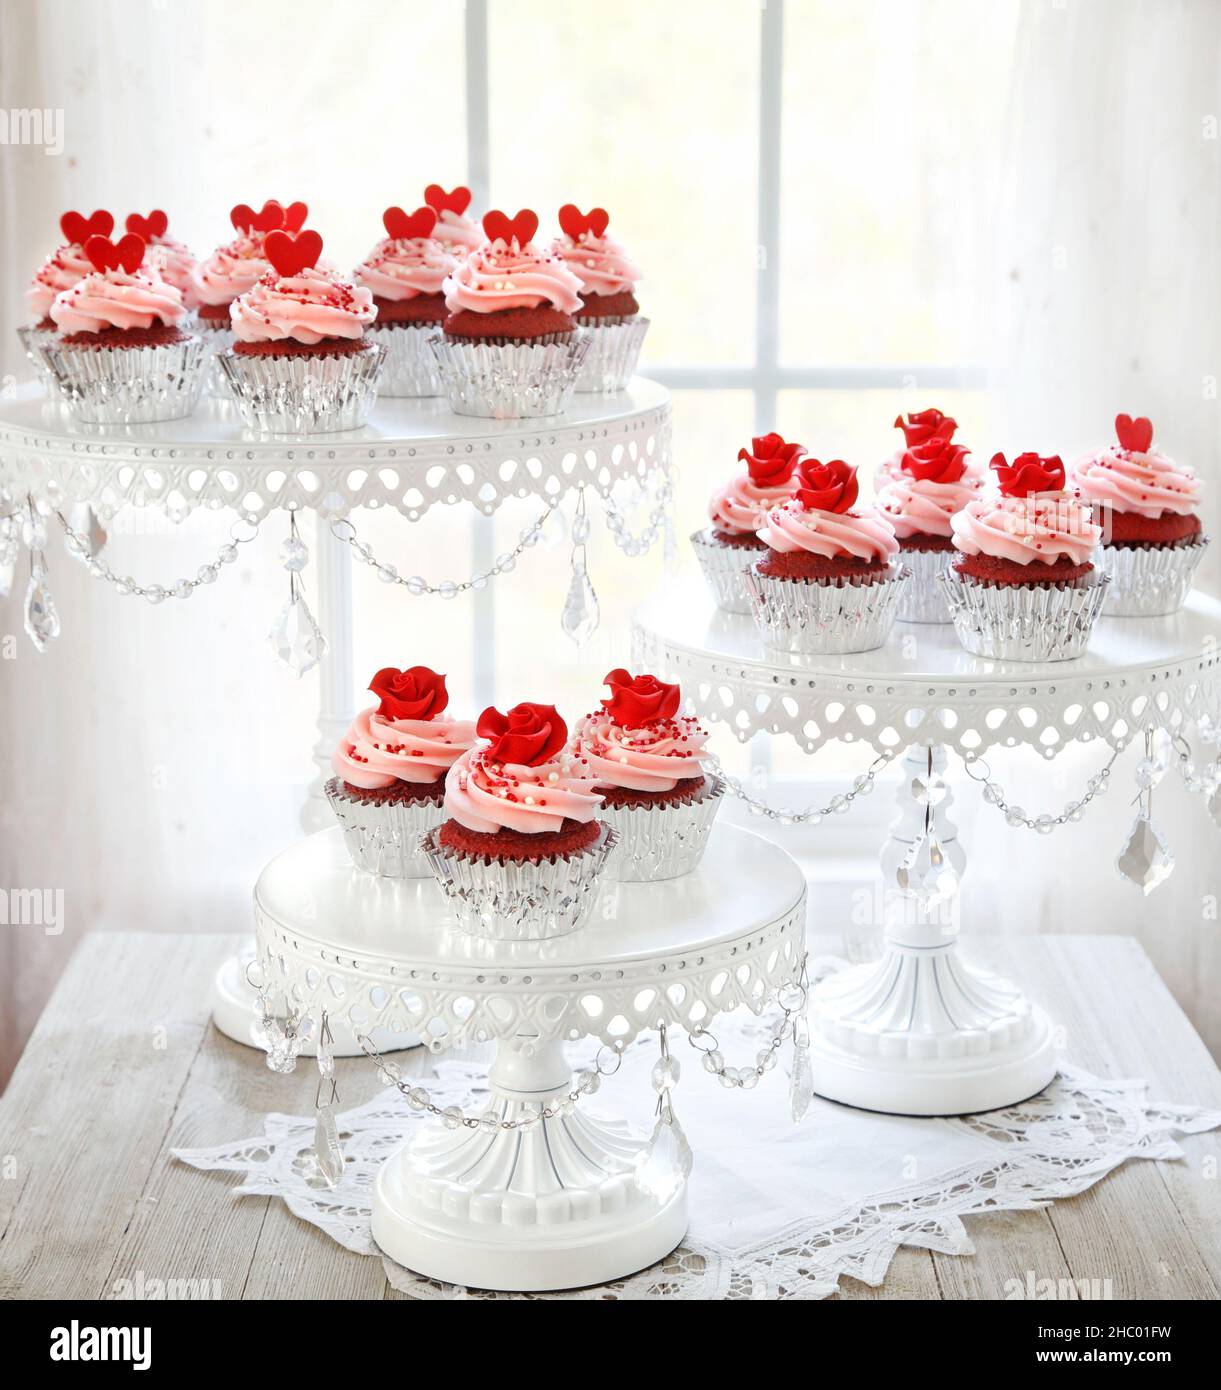 Red velvet cupcakes with pink vanilla frosting decorated with red roses on a three tier stand. Stock Photo